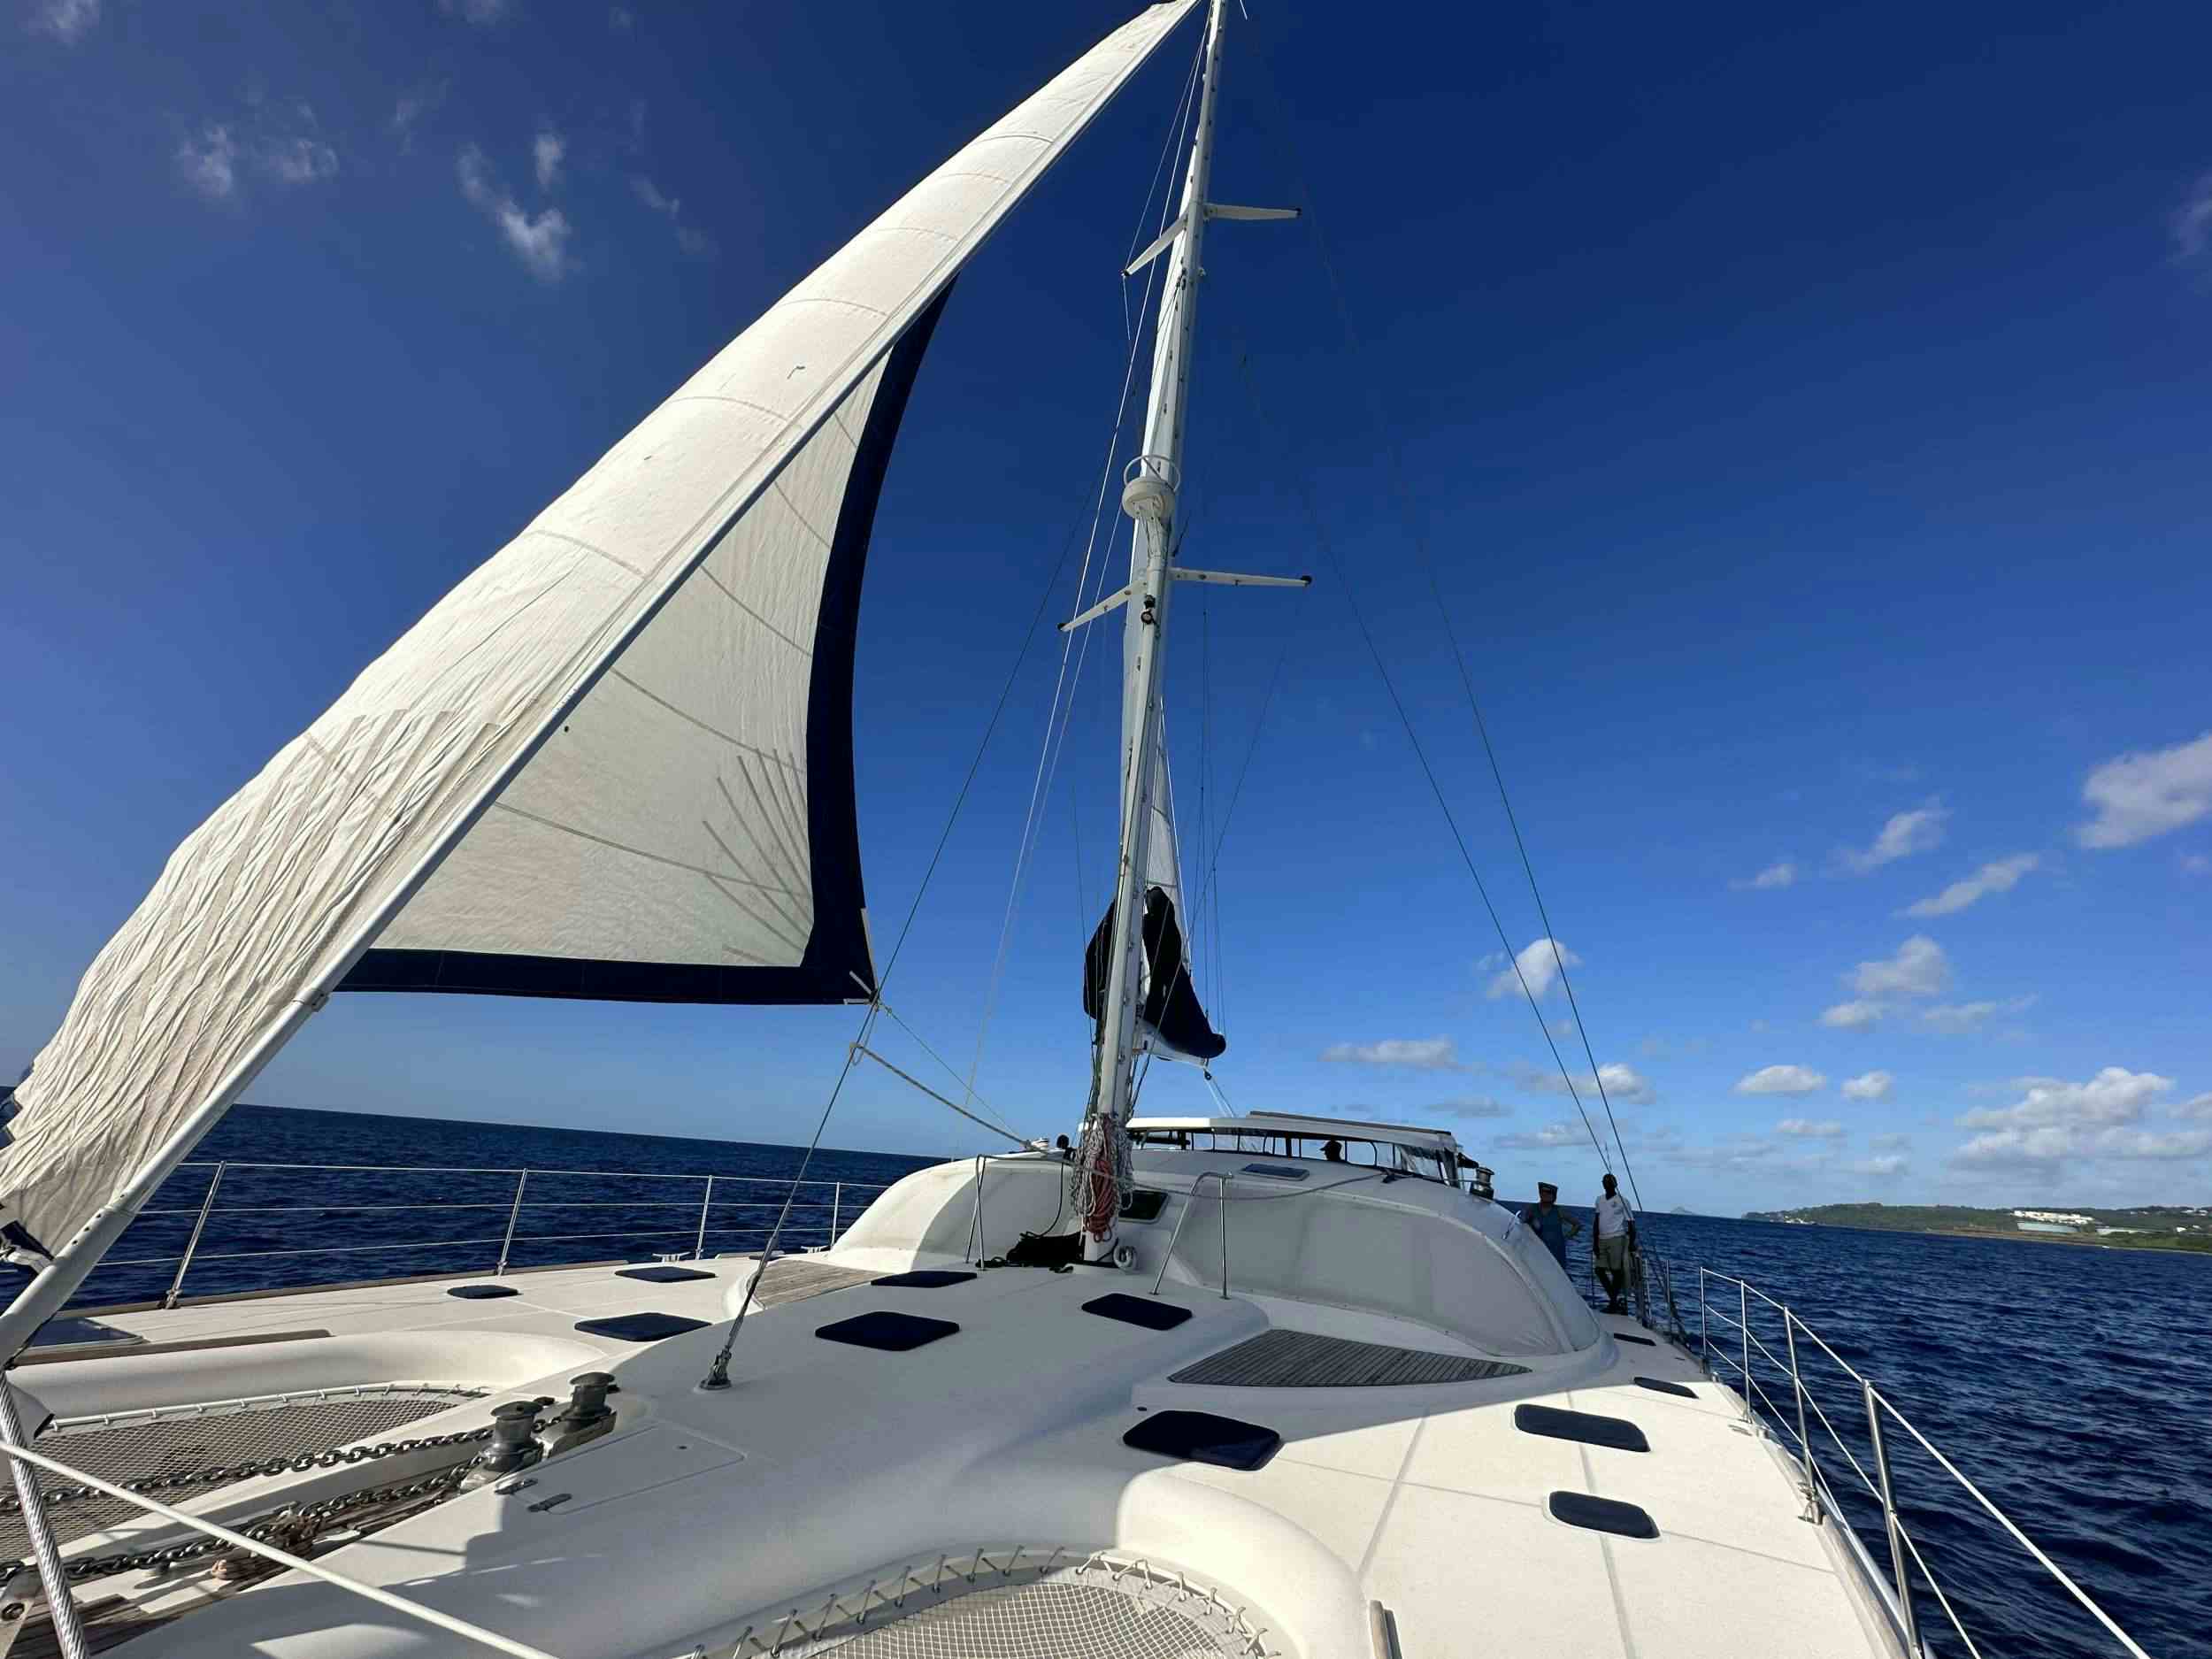 Lady Marigot - Yacht Charter Martinique & Boat hire in Caribbean 1